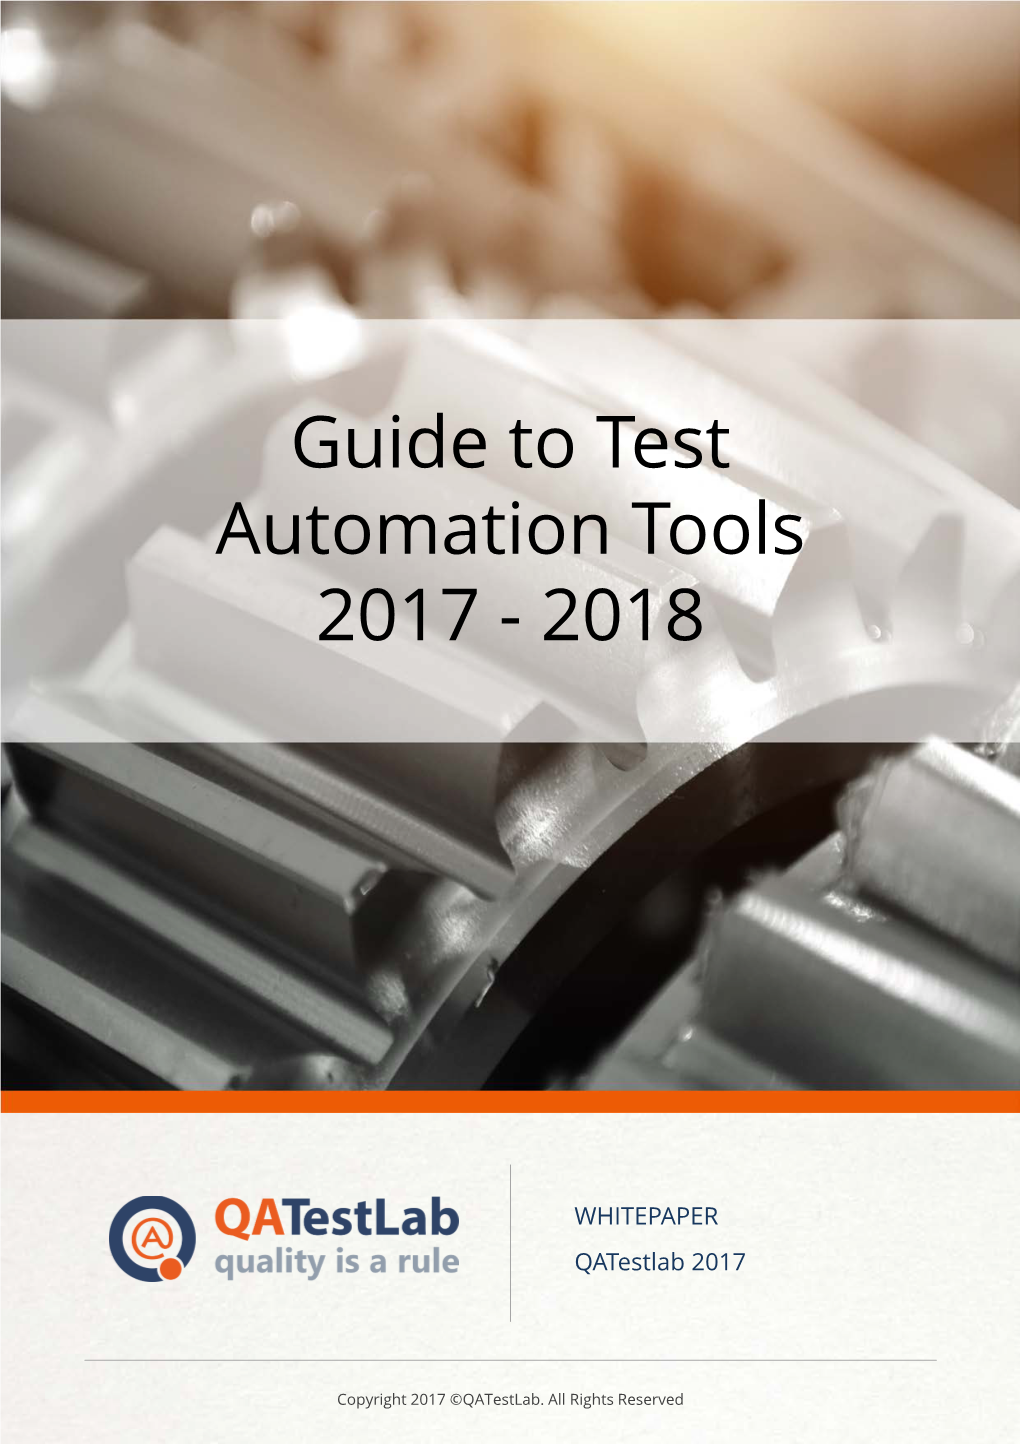 Guide to Test Automation Tools 2017 - 2018